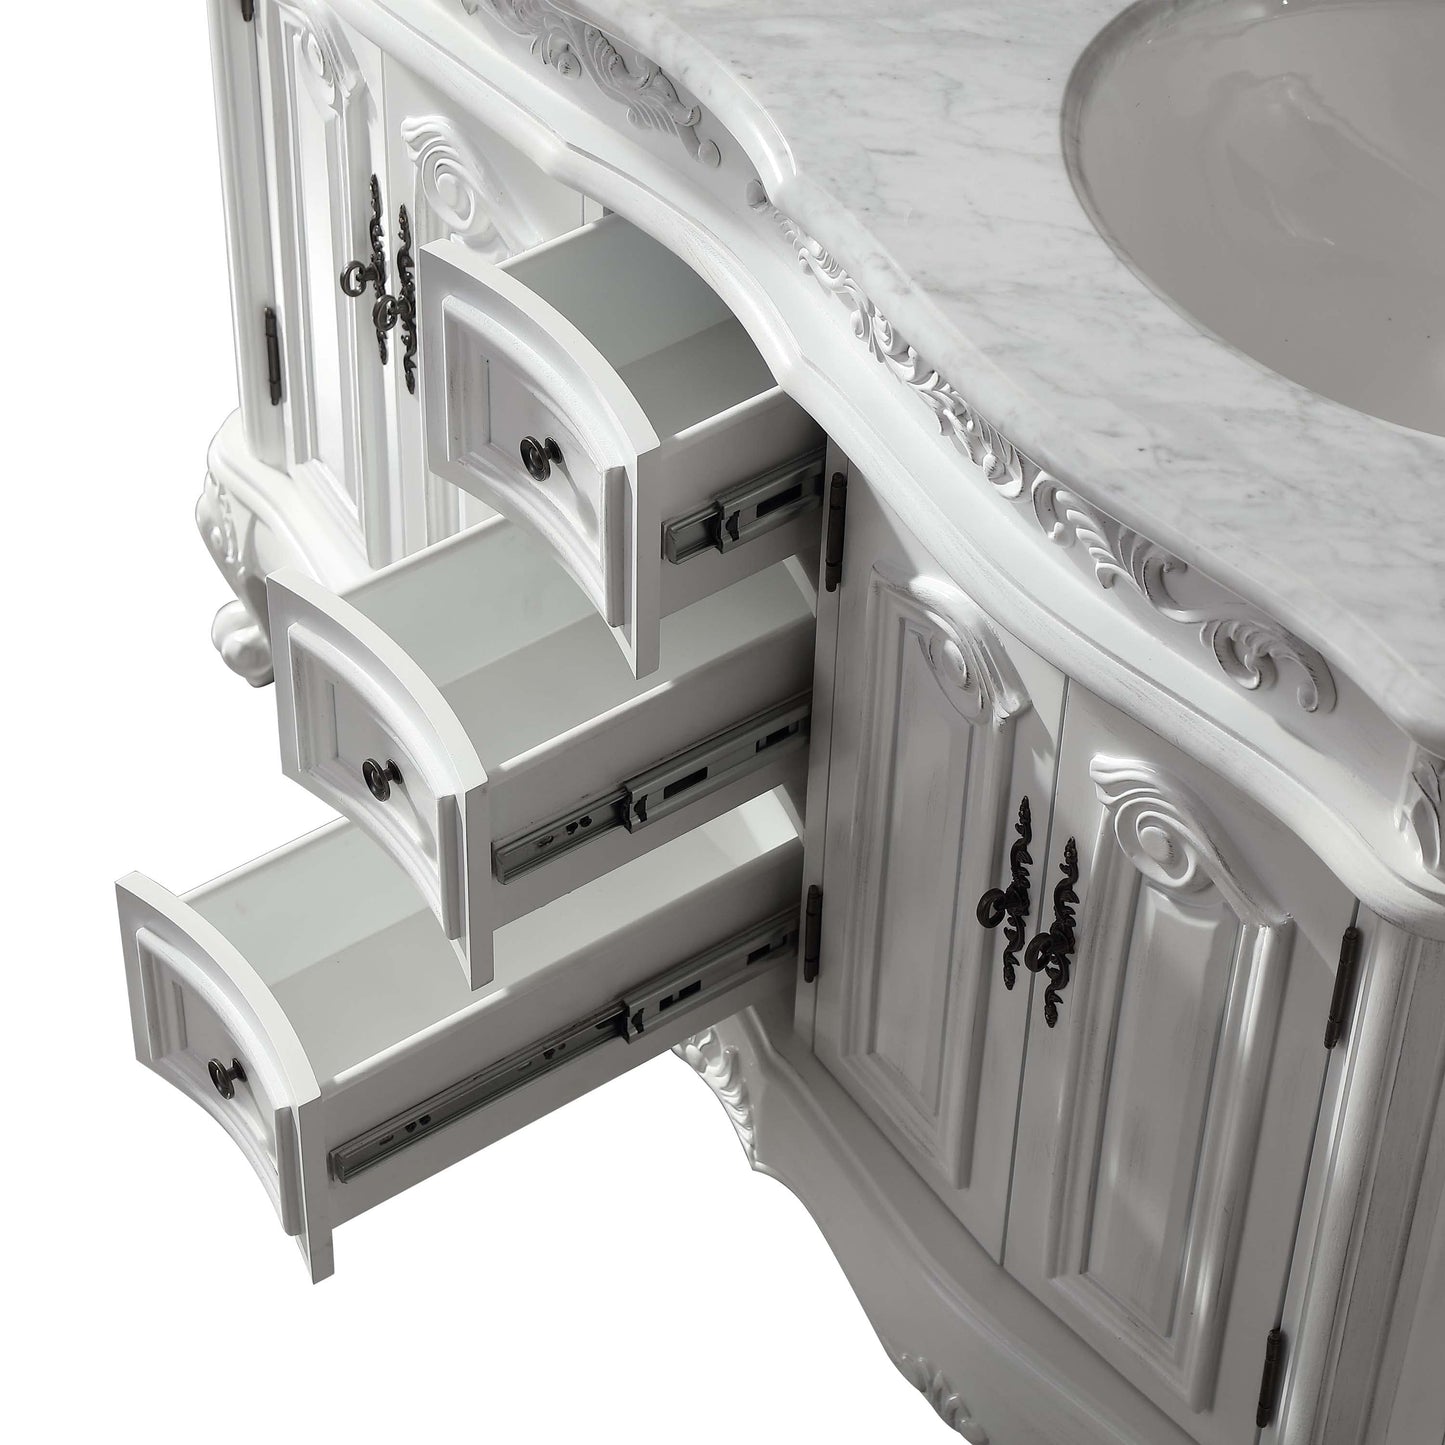 Silkroad Exclusive Silkroad Exclusive 48" Double Sink Cabinet with Carrara White Top HYP-0145-WM-UWC-48